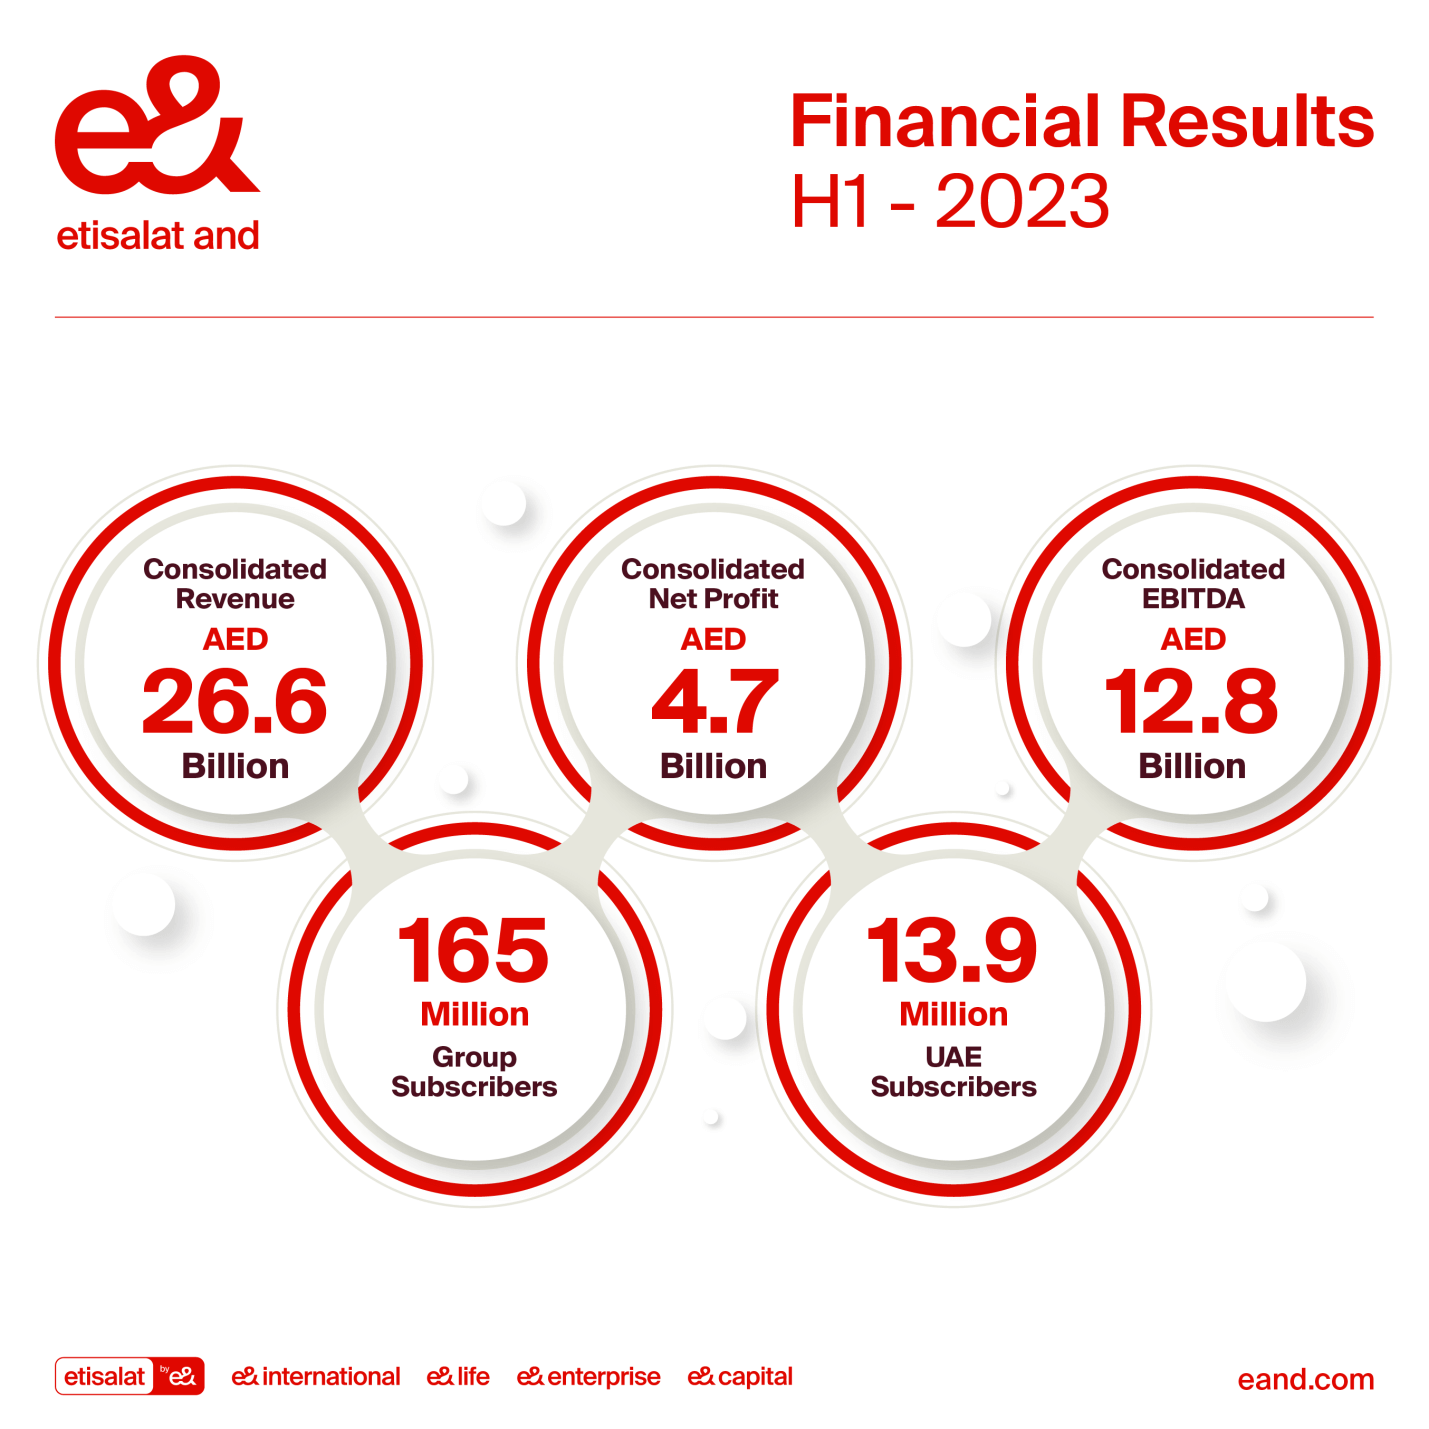 Financial Results H1 2023